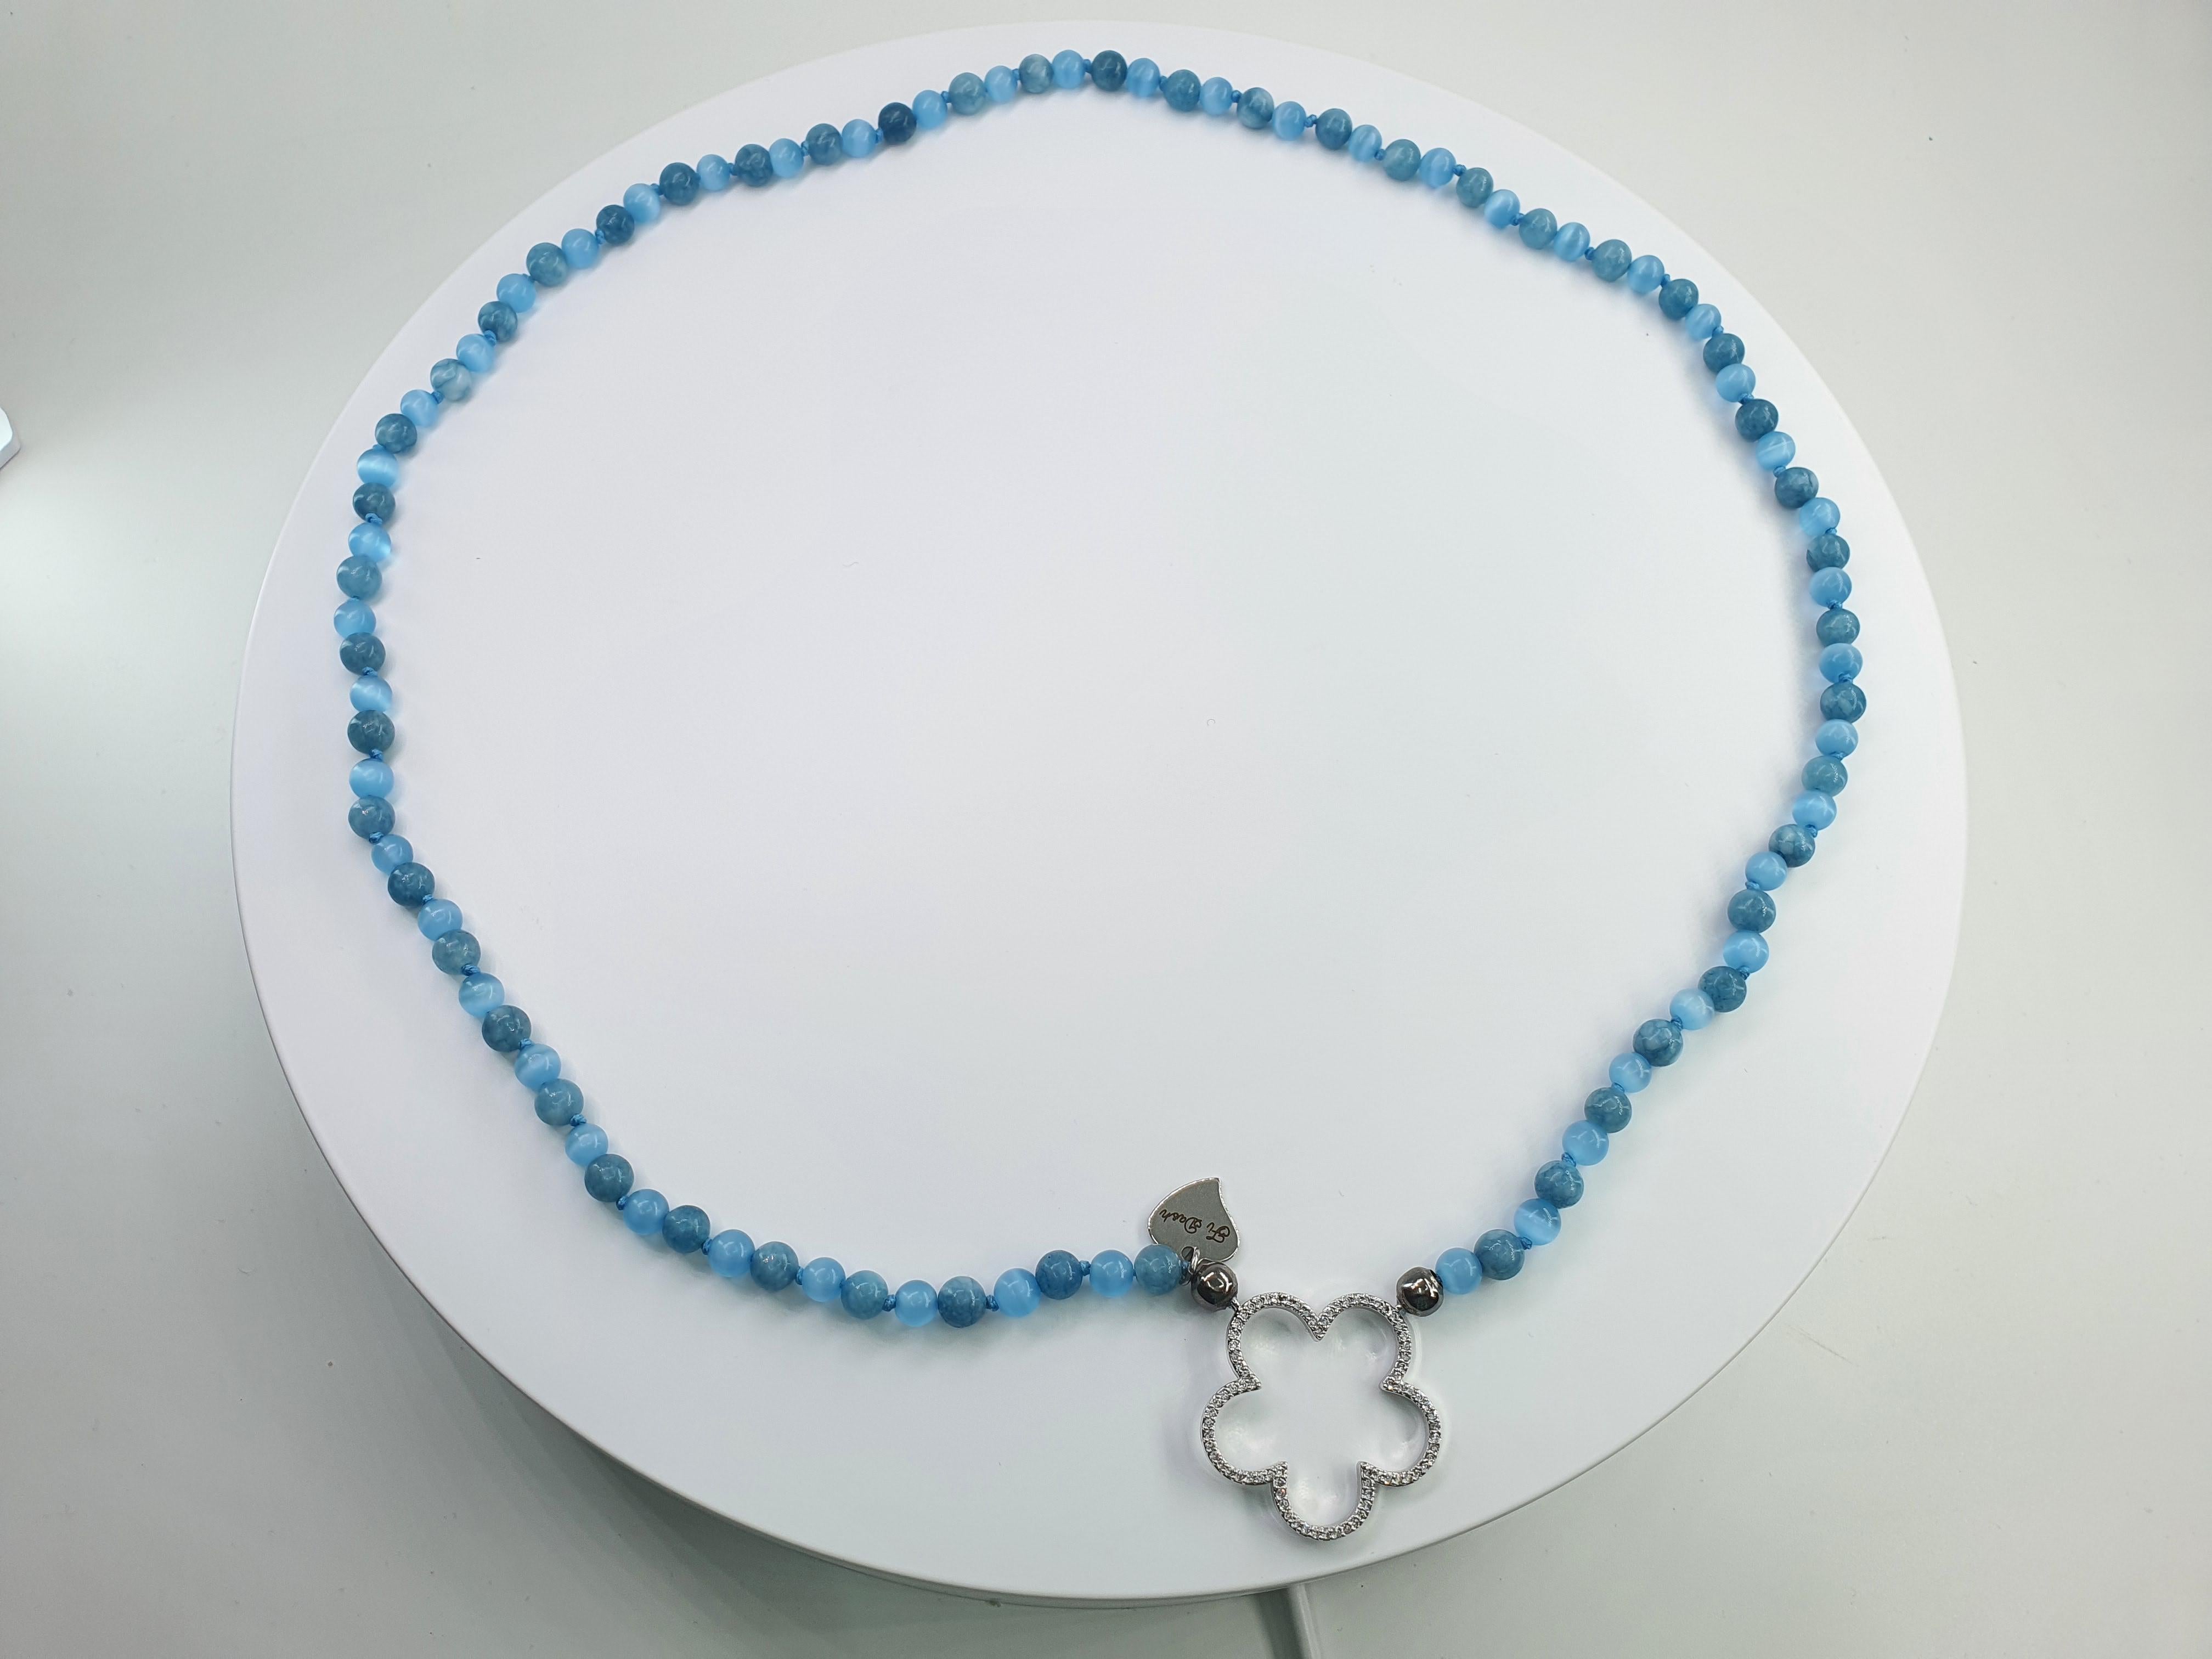 Aquamarine Light Cat Eye Beads Sunglasses Necklace with Flower In New Condition For Sale In Montreux, VD